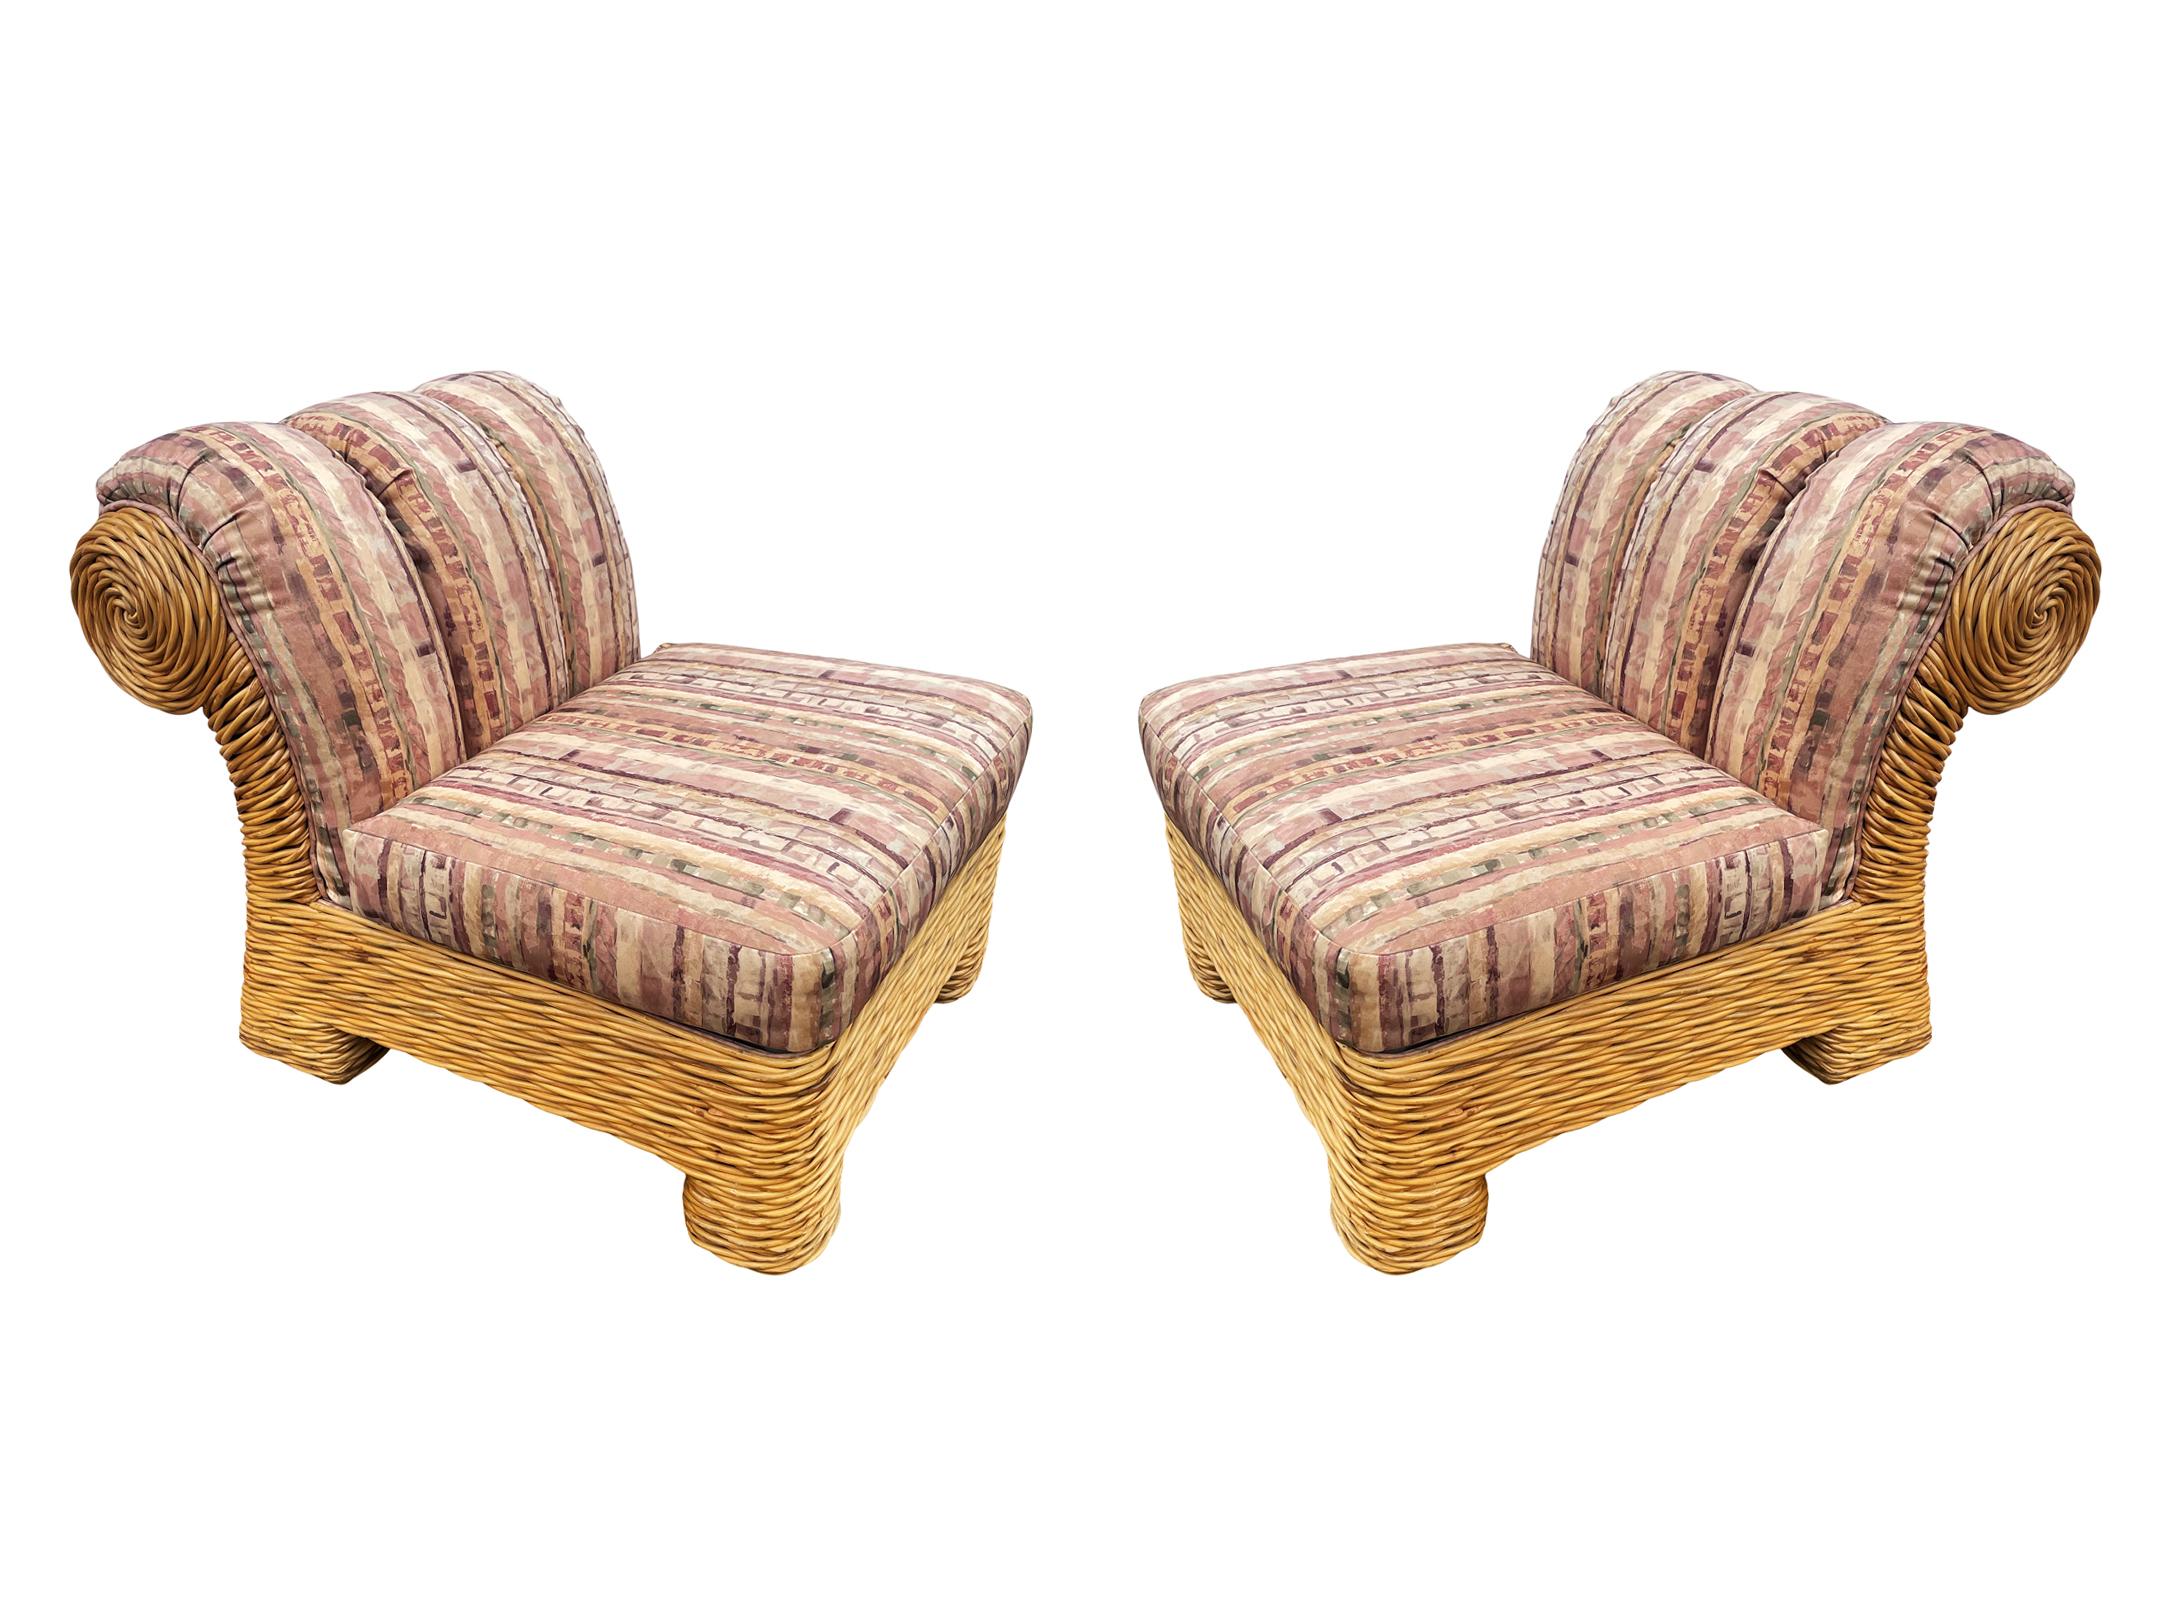 Late 20th Century Matching Pair of Mid-Century Modern Slipper Lounge Chair in Rattan & Fabric